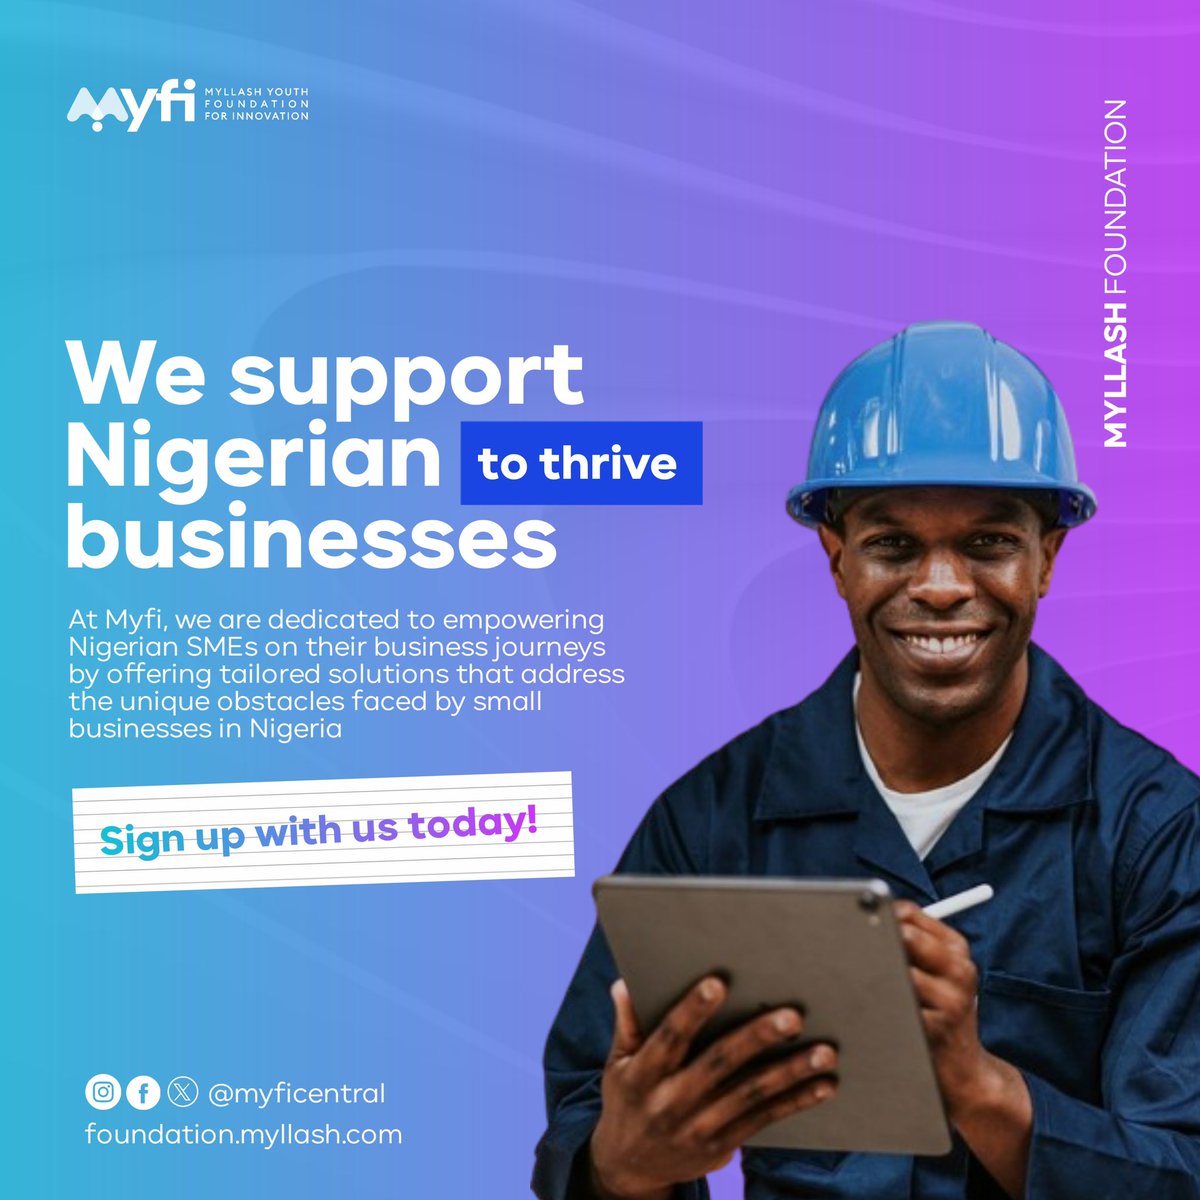 We believe in the power of empowering local businesses, by helping them thrive in today's increasingly digital landscape. Let's transform small businesses in Nigeria.
. 
#myficentral #myfi #techcompany #softwaresolutions #empowerment
#SMEs #supportbusiness